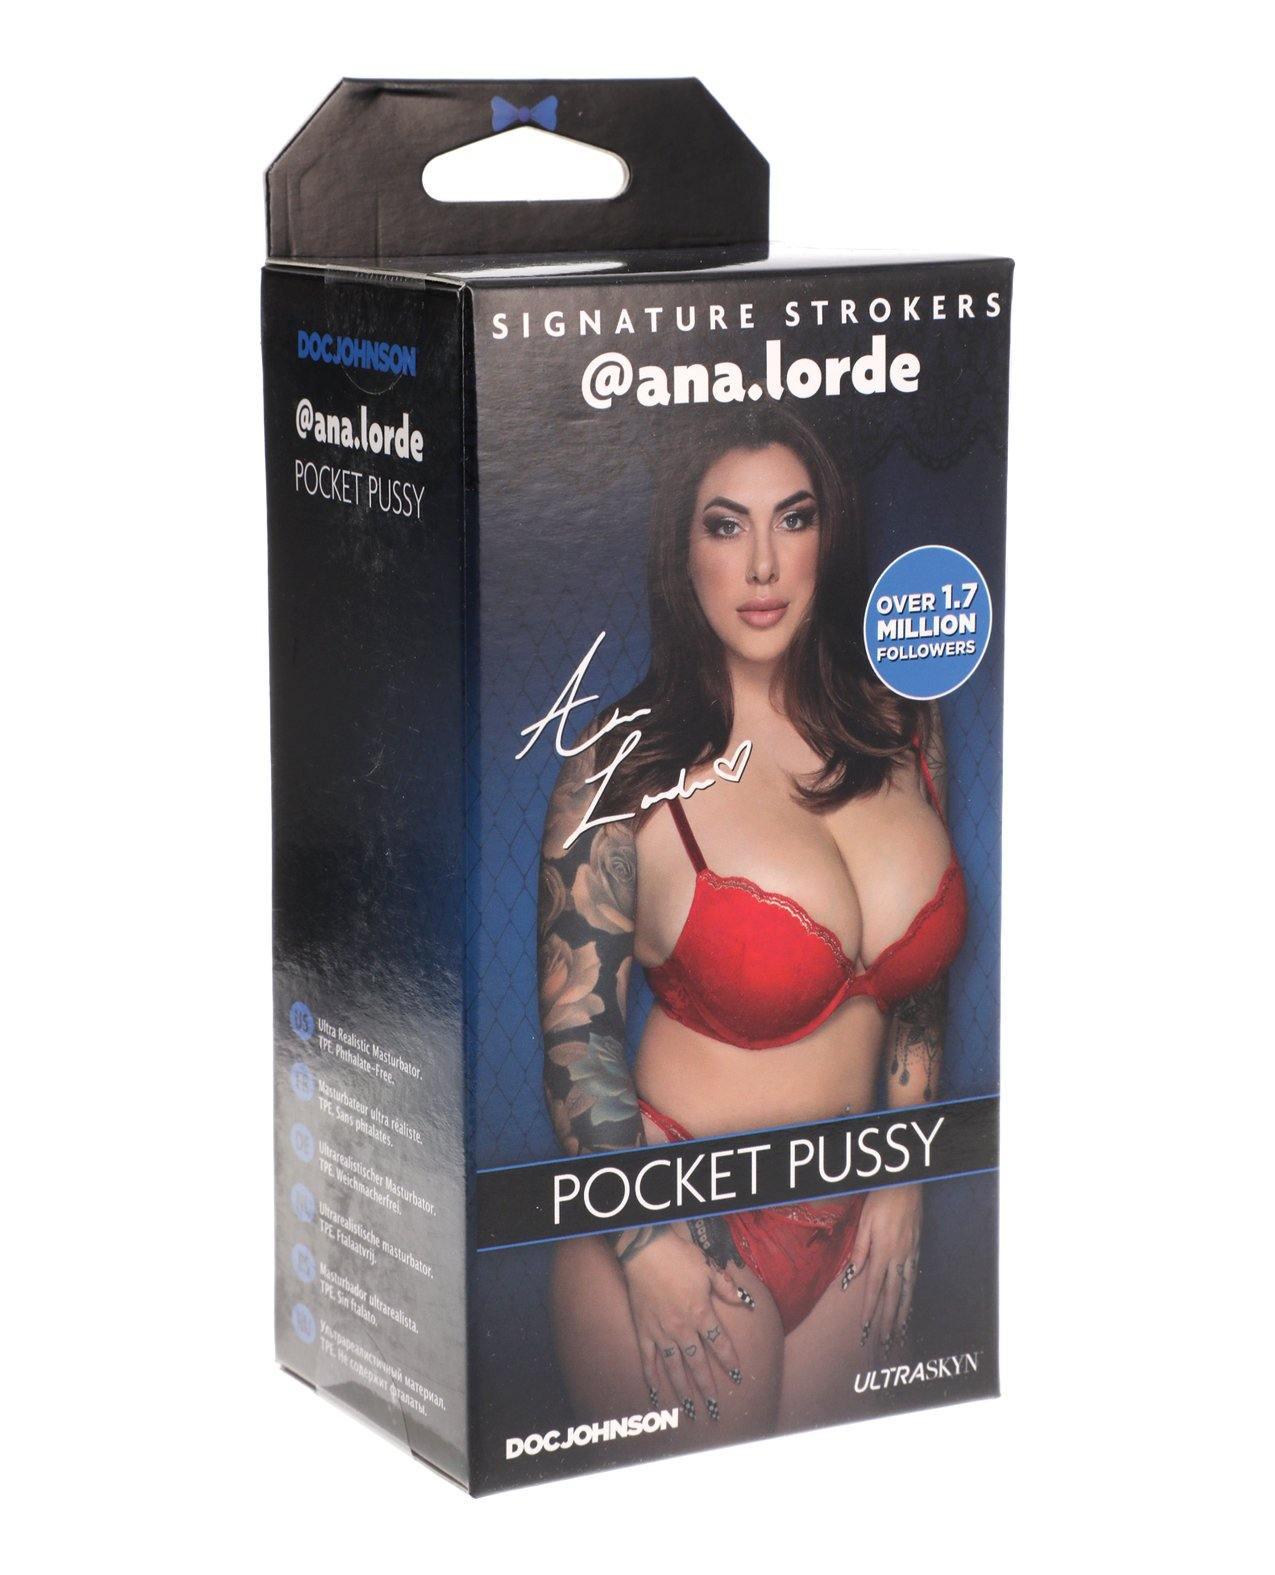 product image, Signature Strokers Girls Of Social Media Ultraskyn Pocket Pussy - @ana.lorde - SEXYEONE